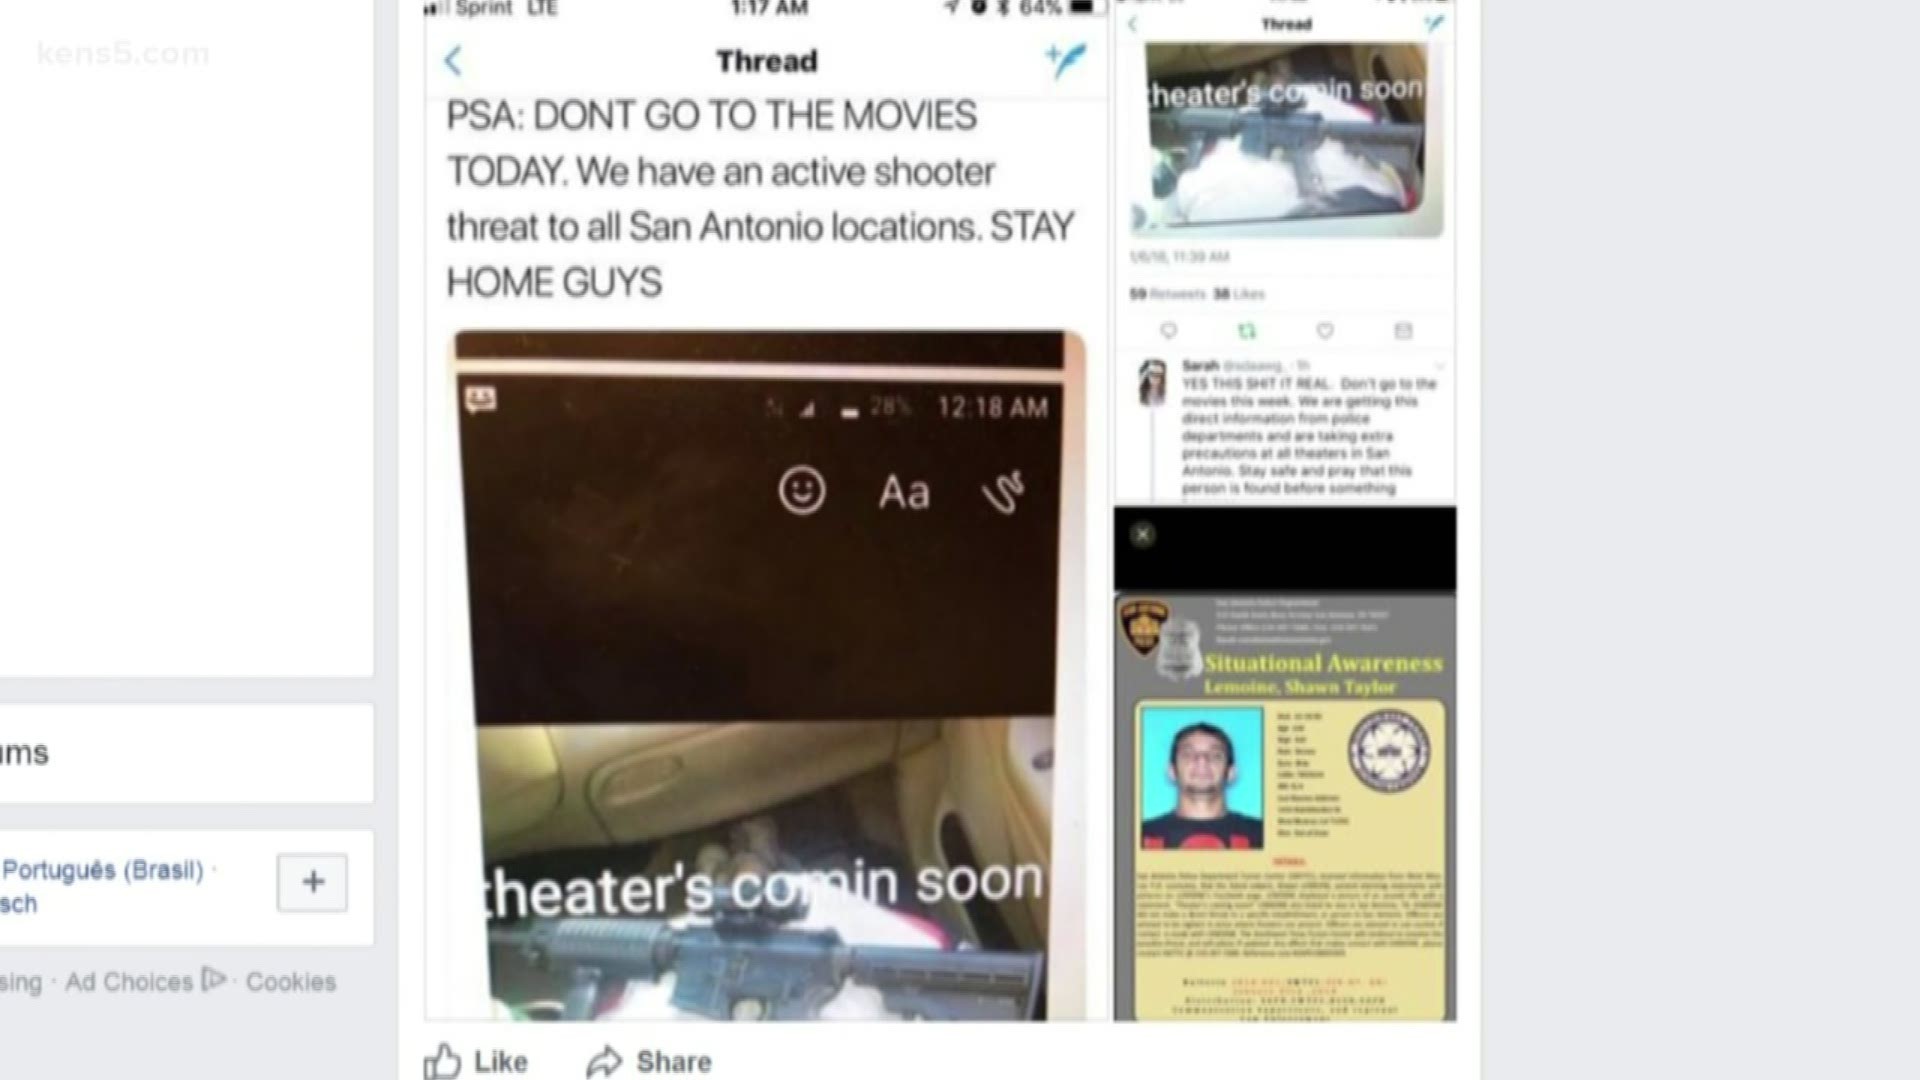 After a social media post threatening San Antonio movie theaters went viral, SAPD and the FBI investigated and arrested the suspect.